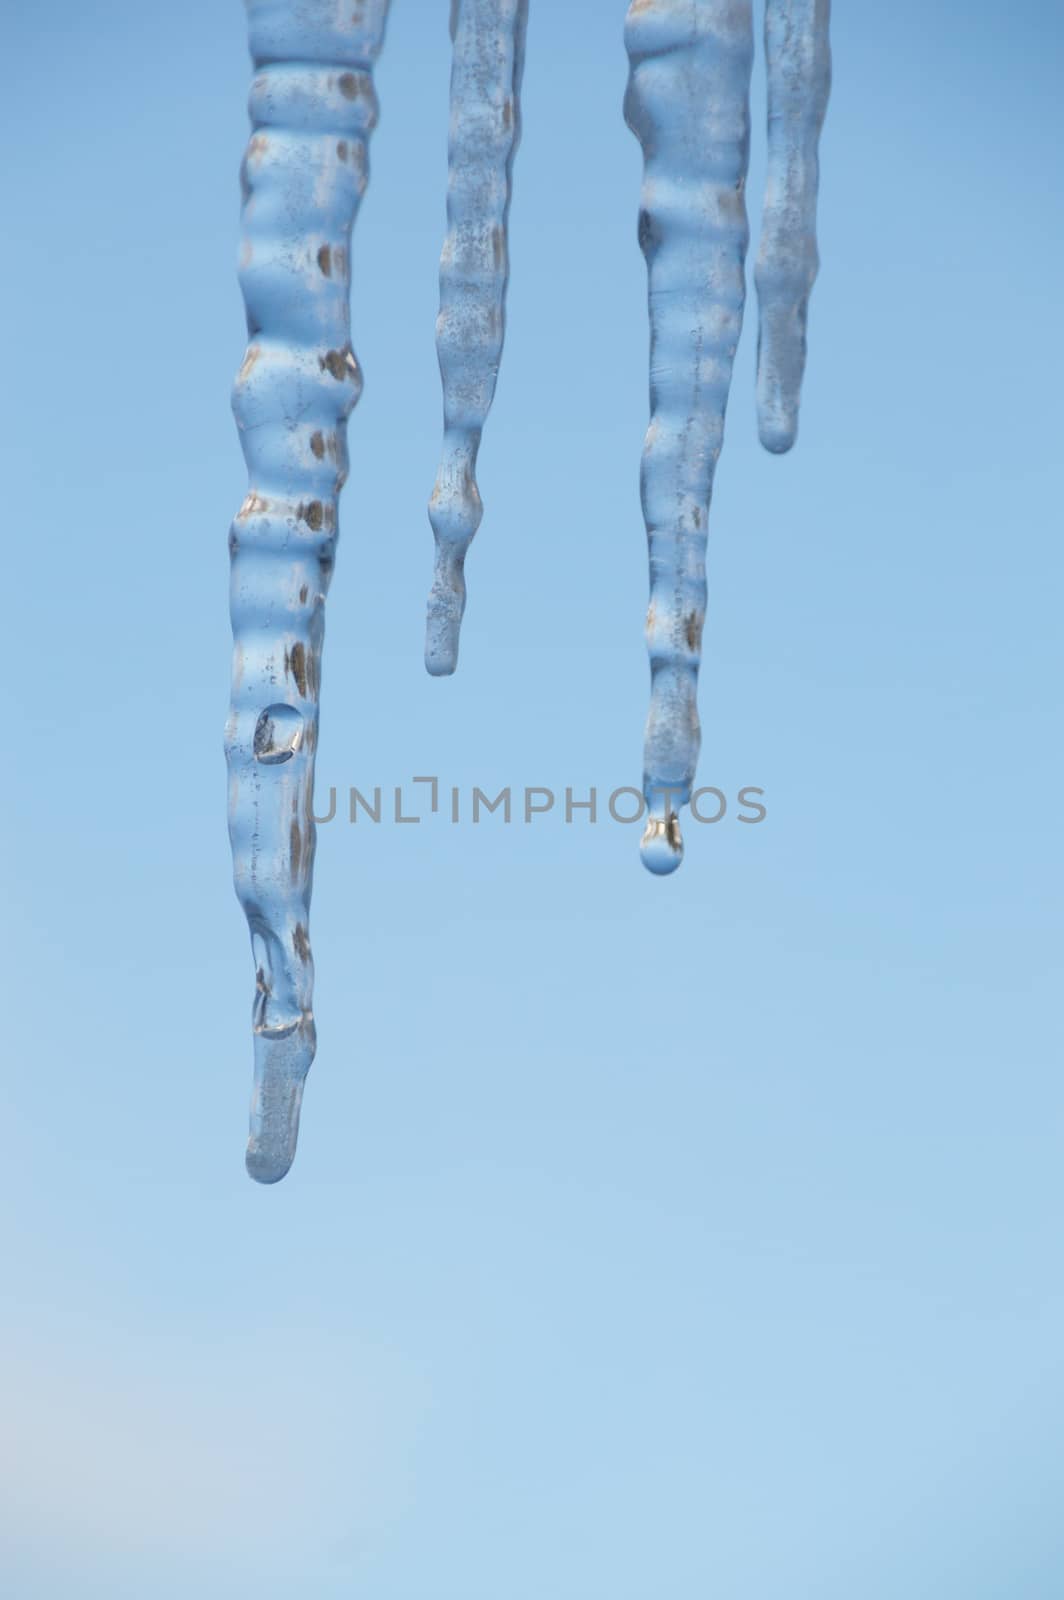 Closeup of icicles against a blue sky/ One has a clear water drop about to fall.